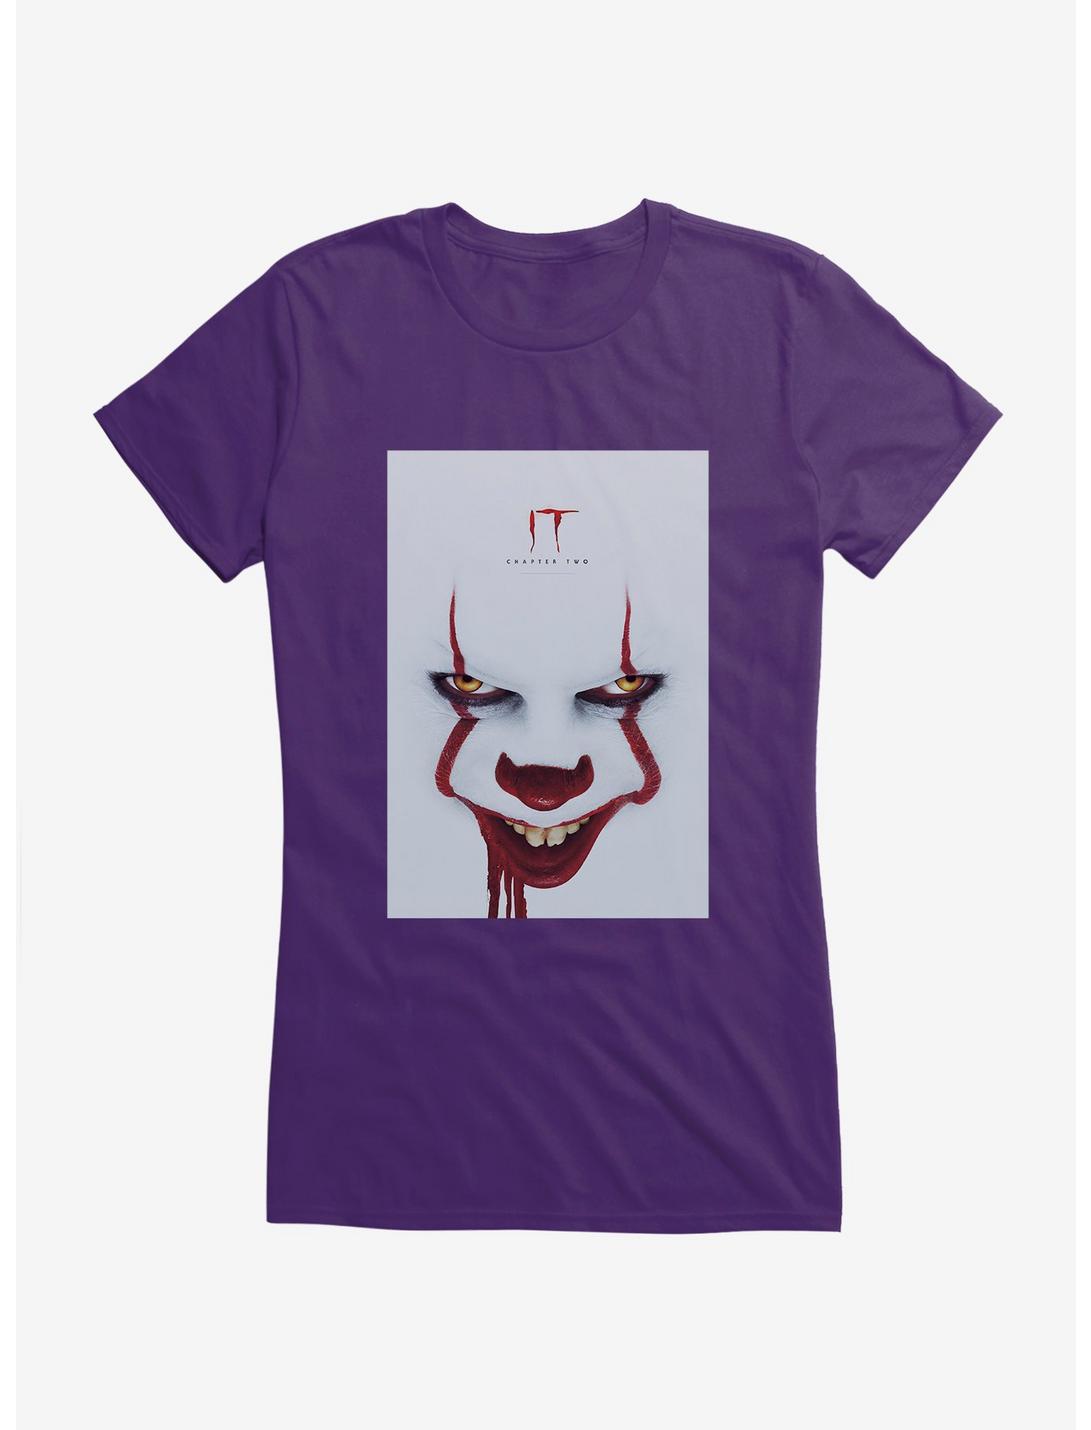 IT Chapter Two Pennywise Grin Poster Girls T-Shirt, PURPLE, hi-res